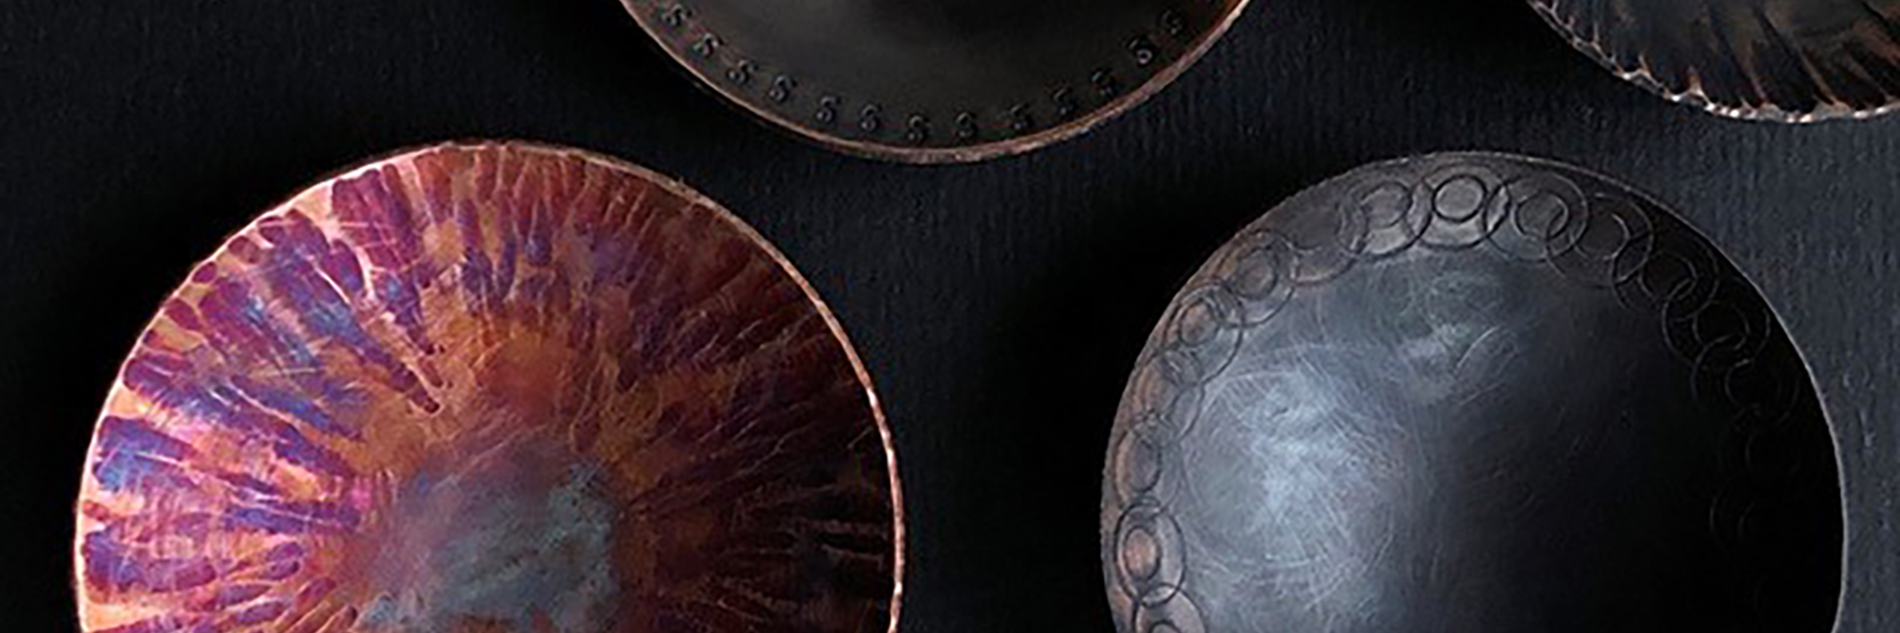 Four copper bowls. Three are dark grey with decorative details around the edges. One is orange and purple in colour.